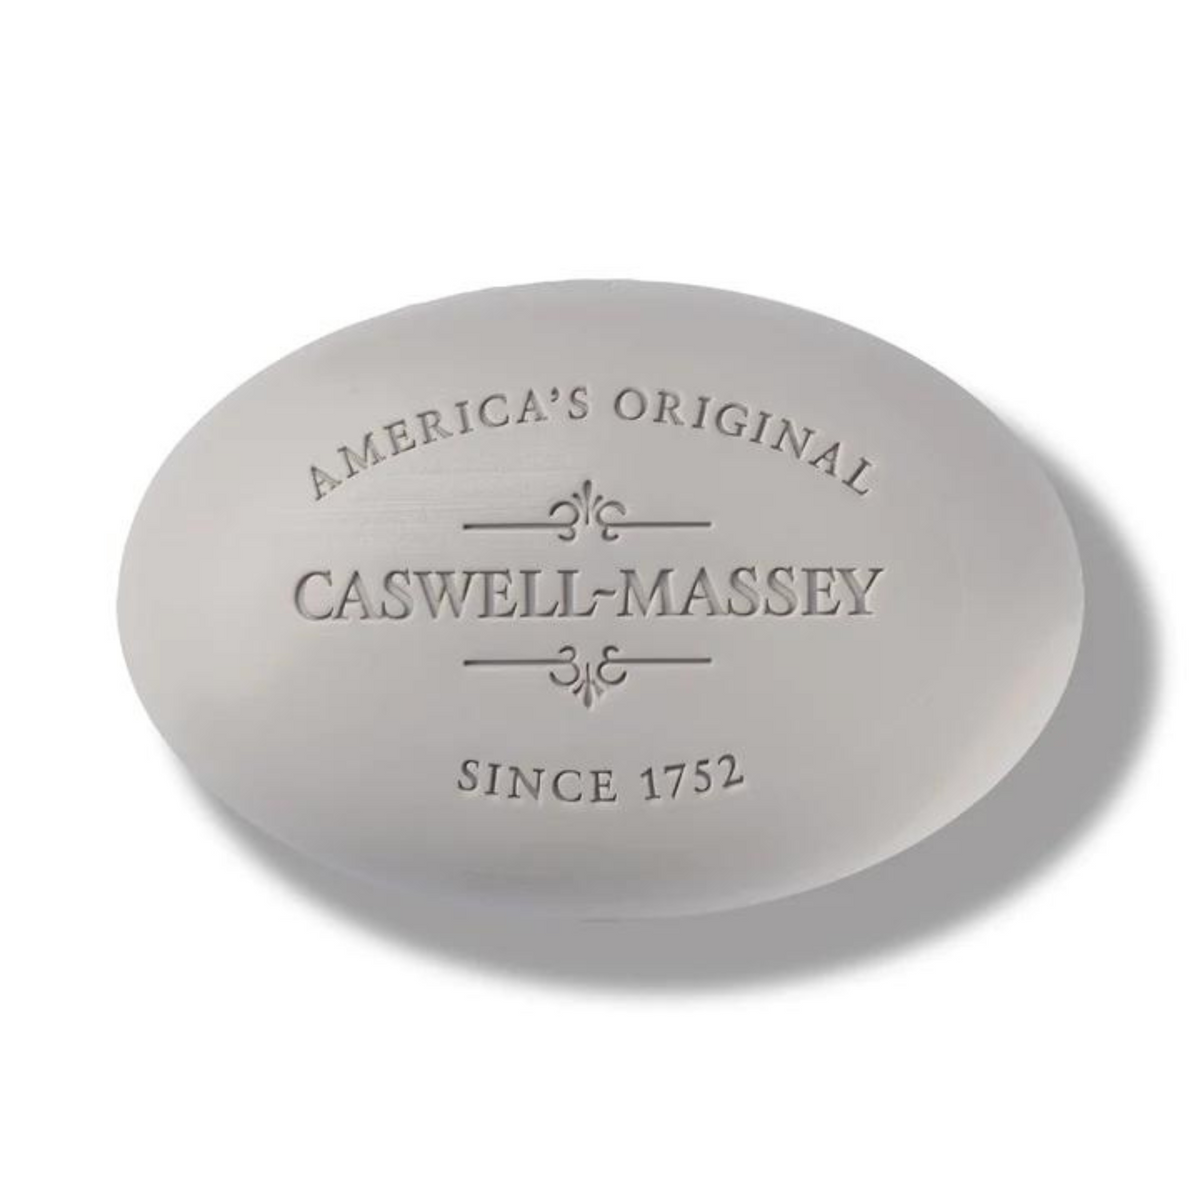 Primary Image of LX48 Bar Soap (5.8 oz)